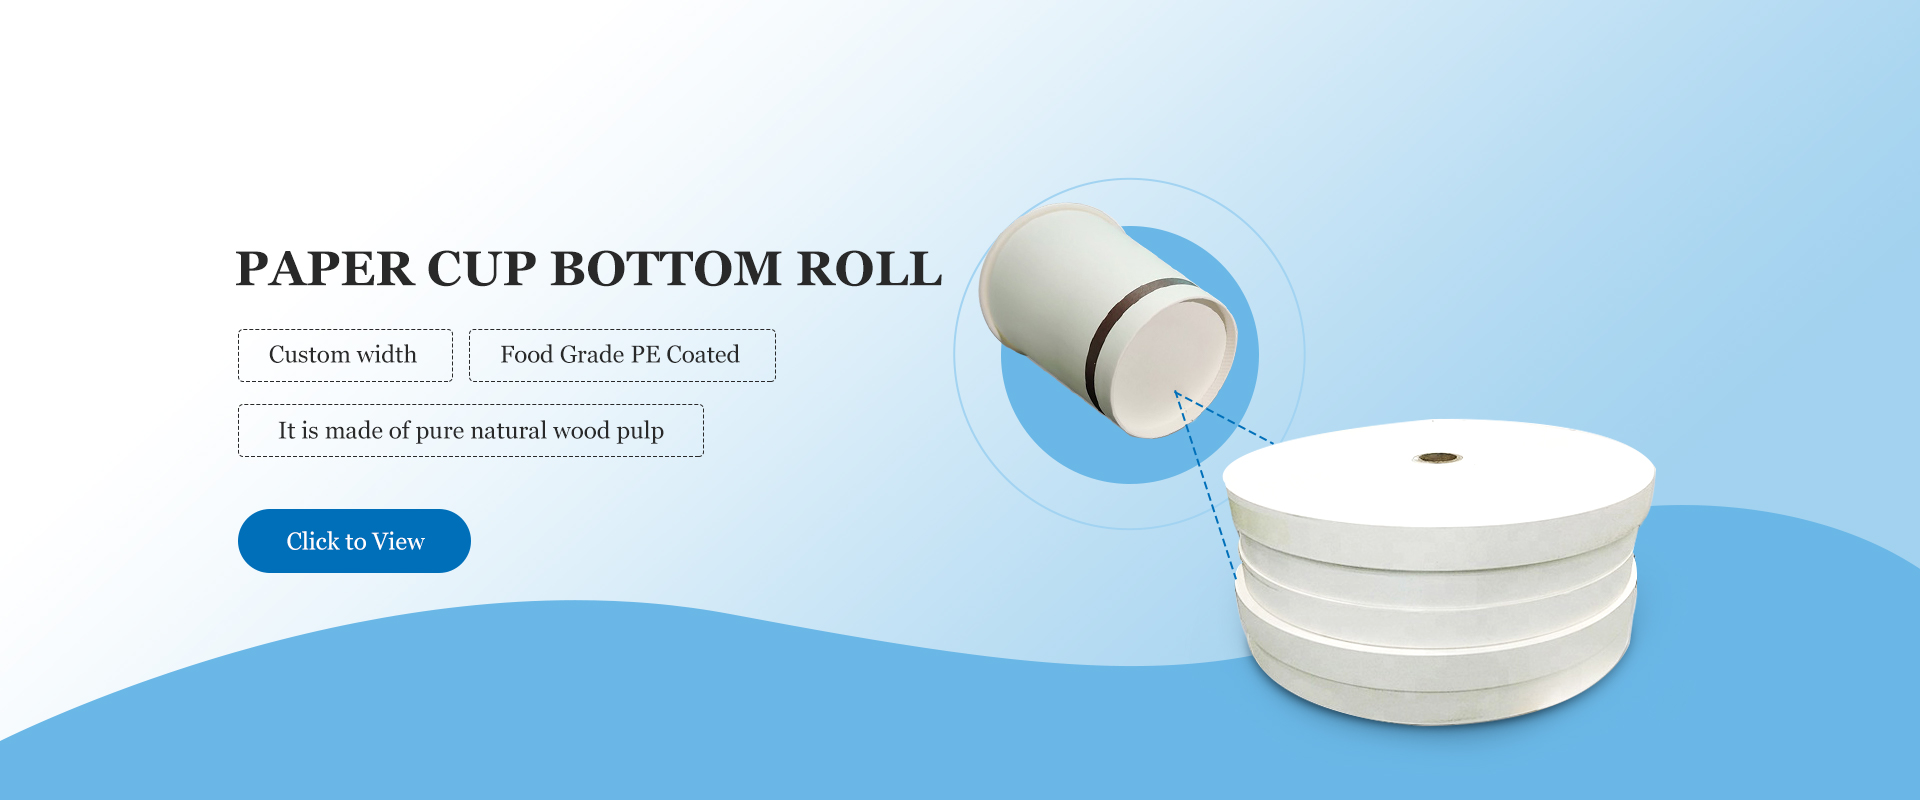 I-Paper Cup Bottom Roll